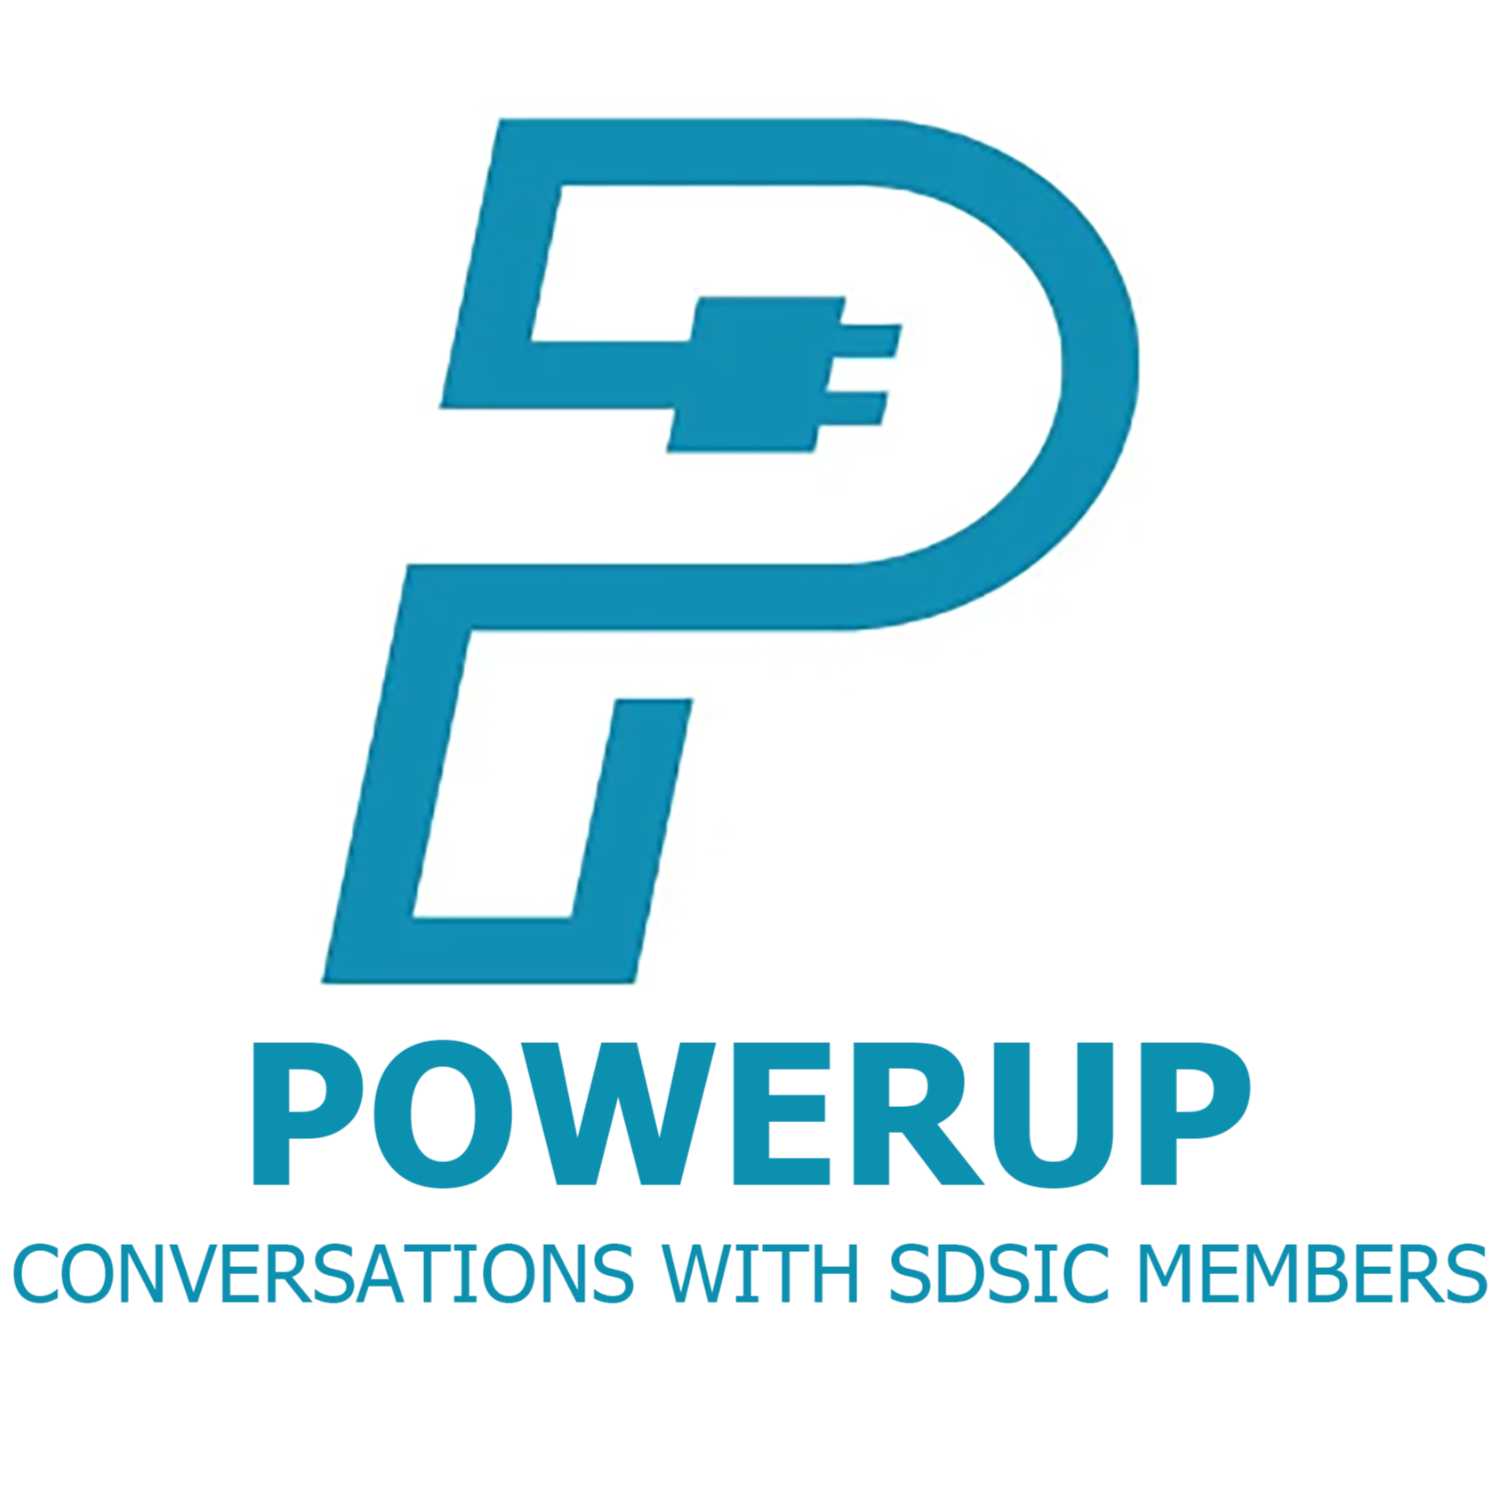 PowerUp: Conversations with SDSIC Members